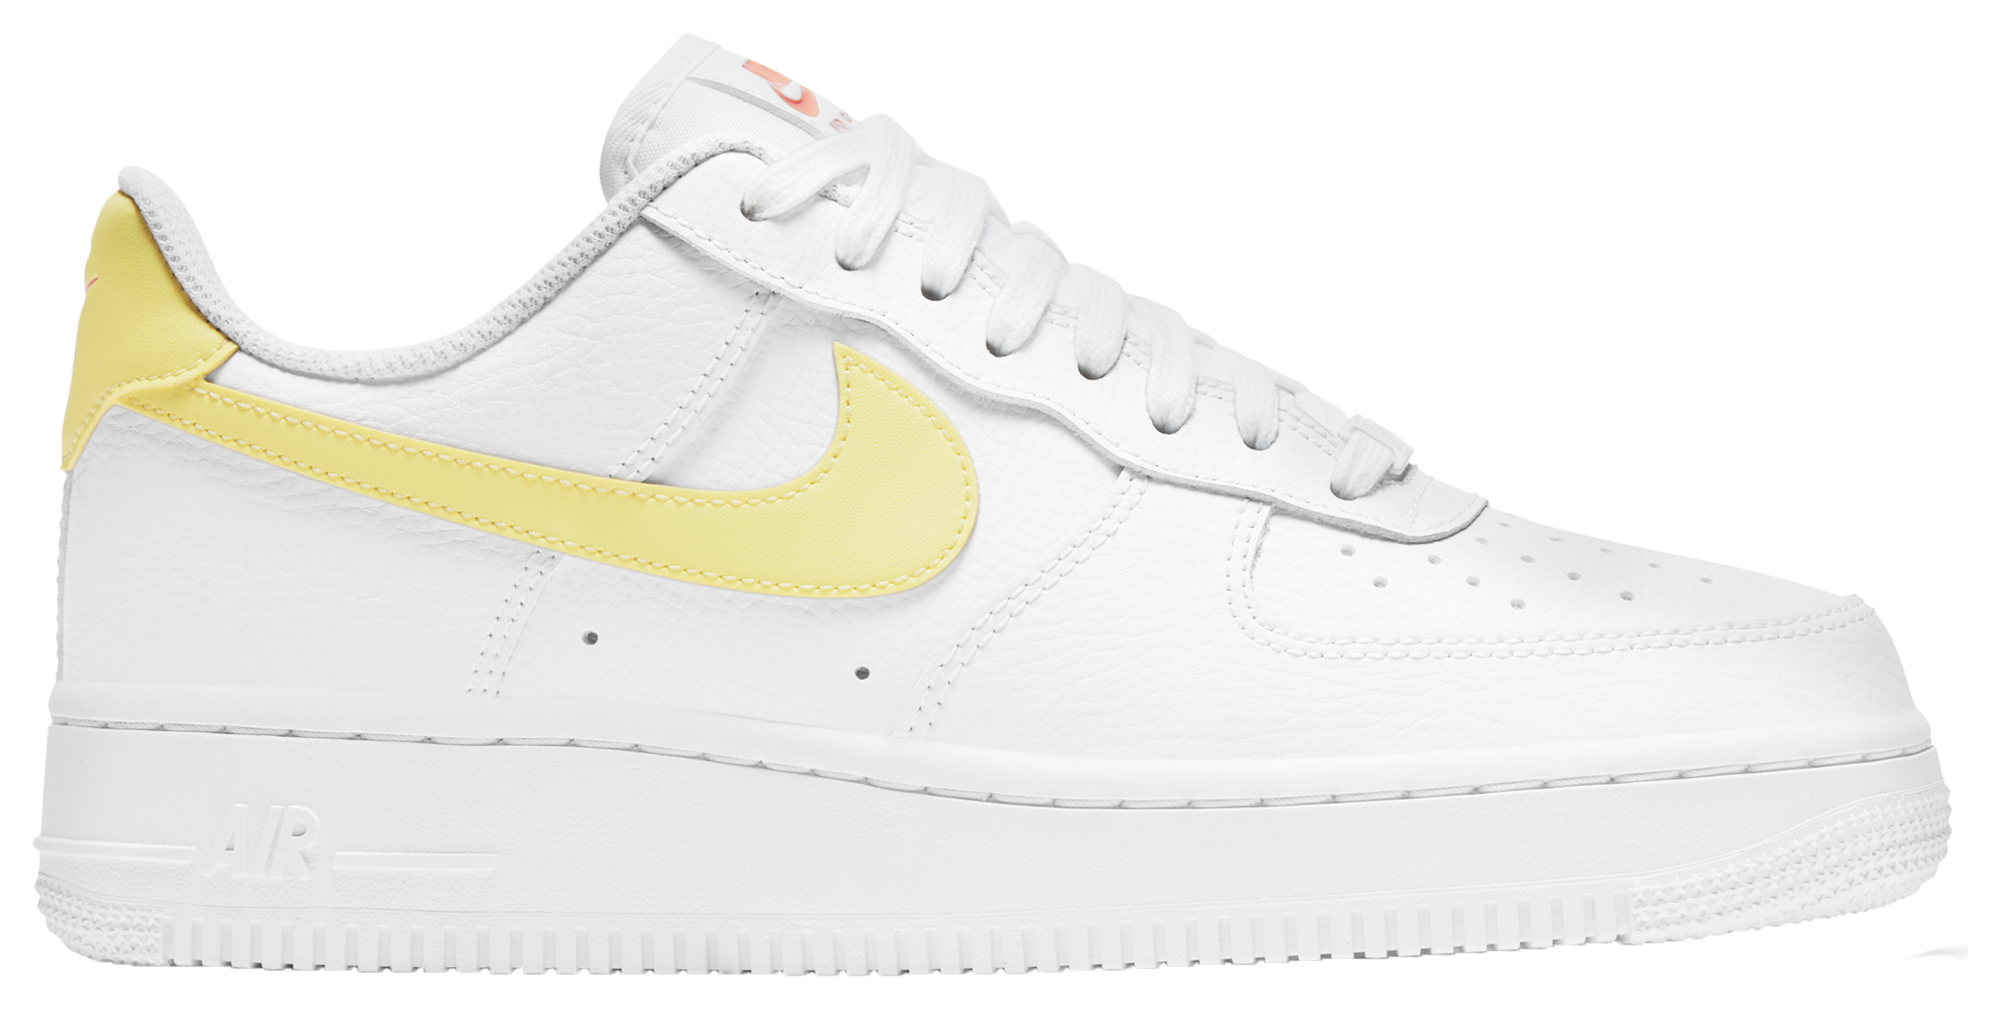 nike air force 1 07 le low women